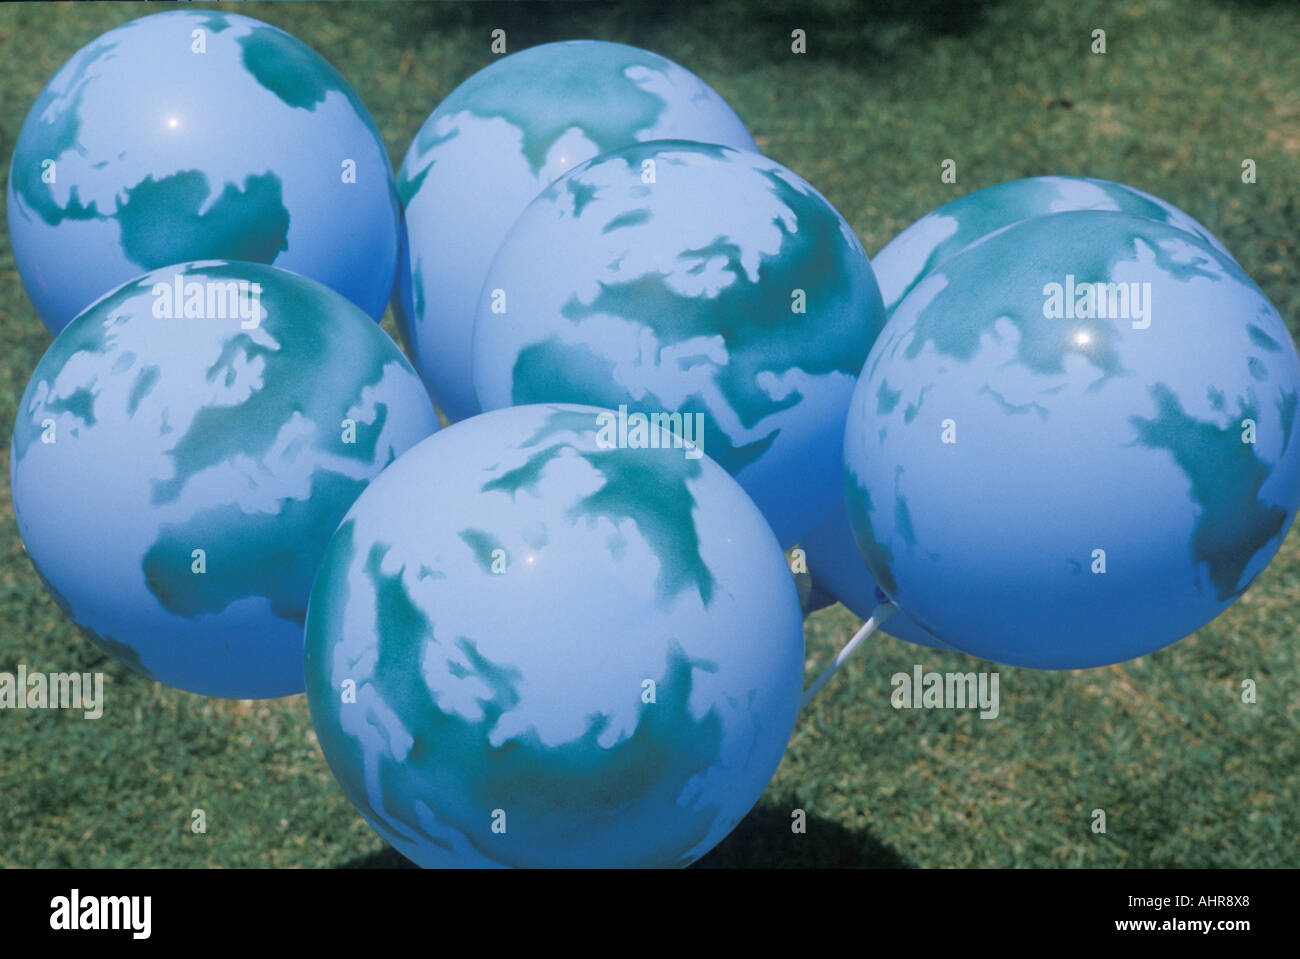 A group of balloons designed to look like globes Stock Photo